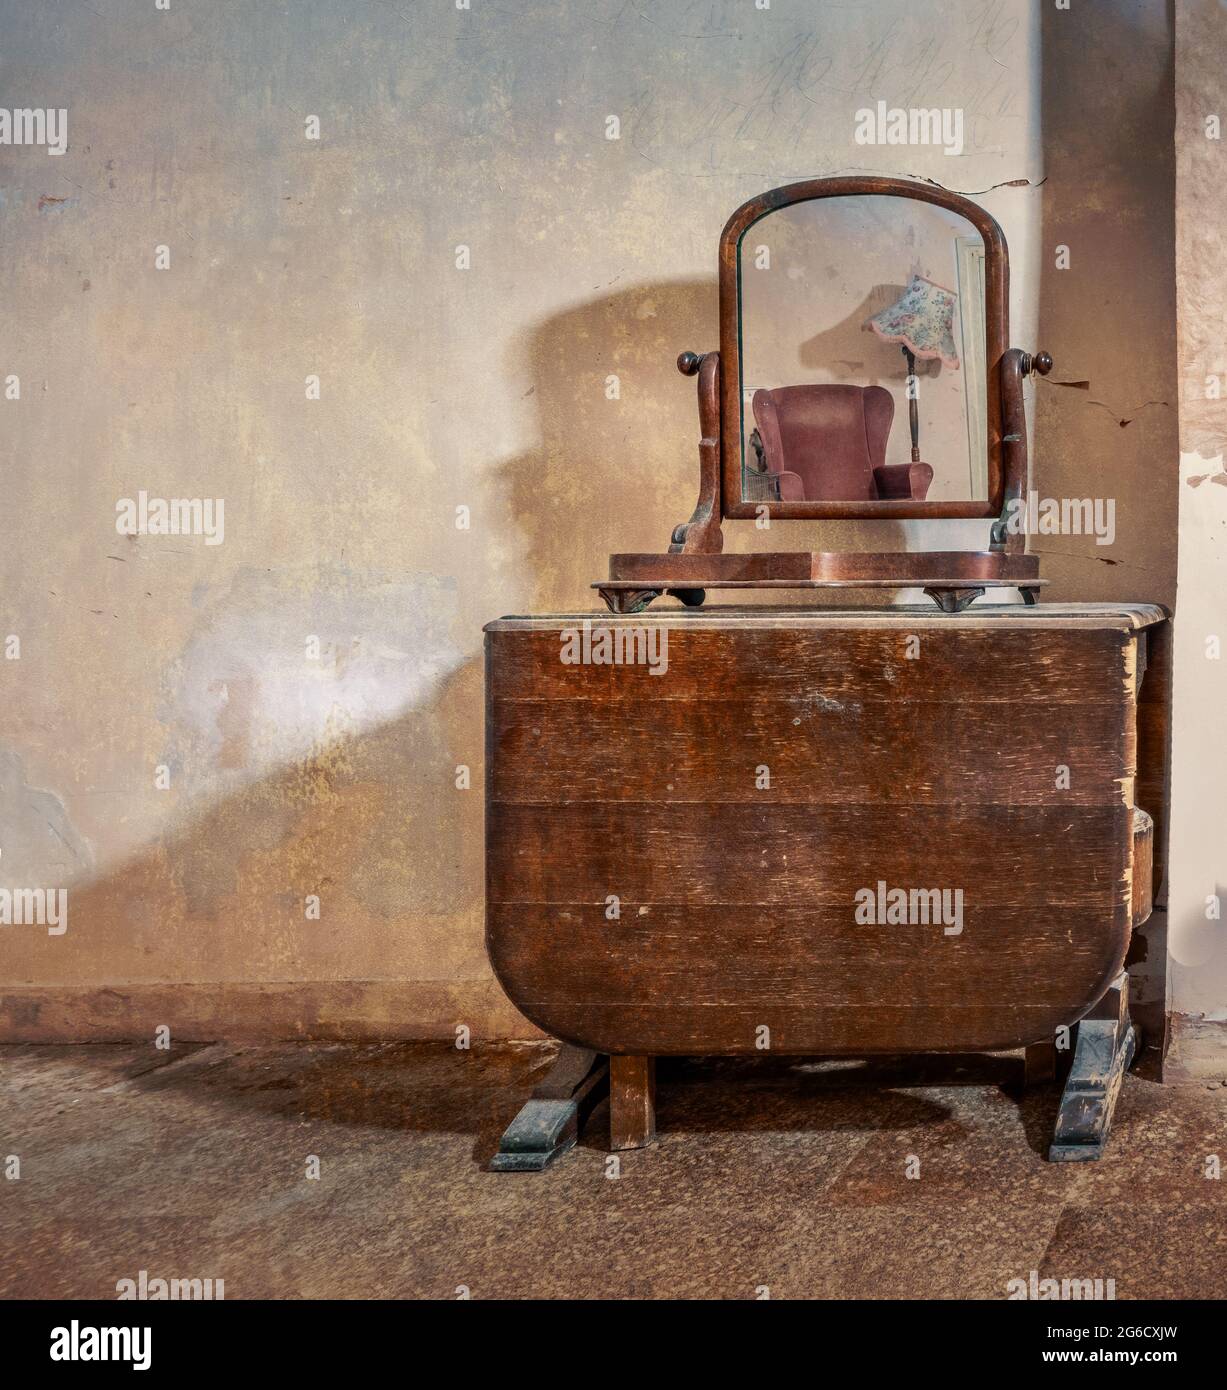 Mirror on old table reflecting chair, lamp. Vintage, retro furniture items in abandoned old derelict house. Stock Photo